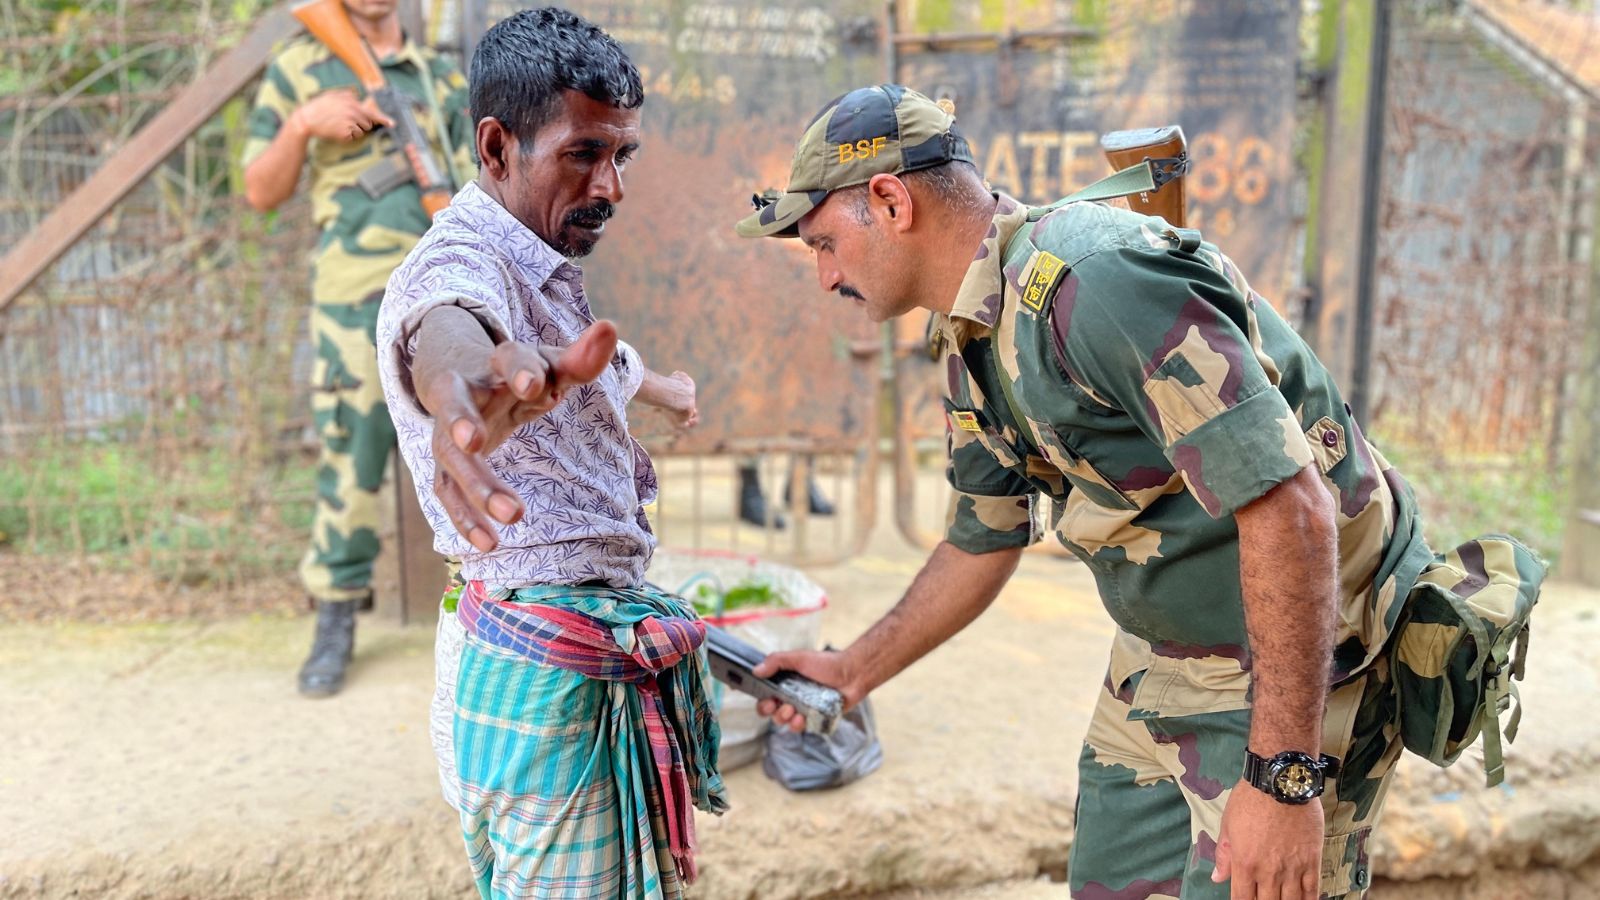 Villagers being checked by BSF jawans. (Express photo)